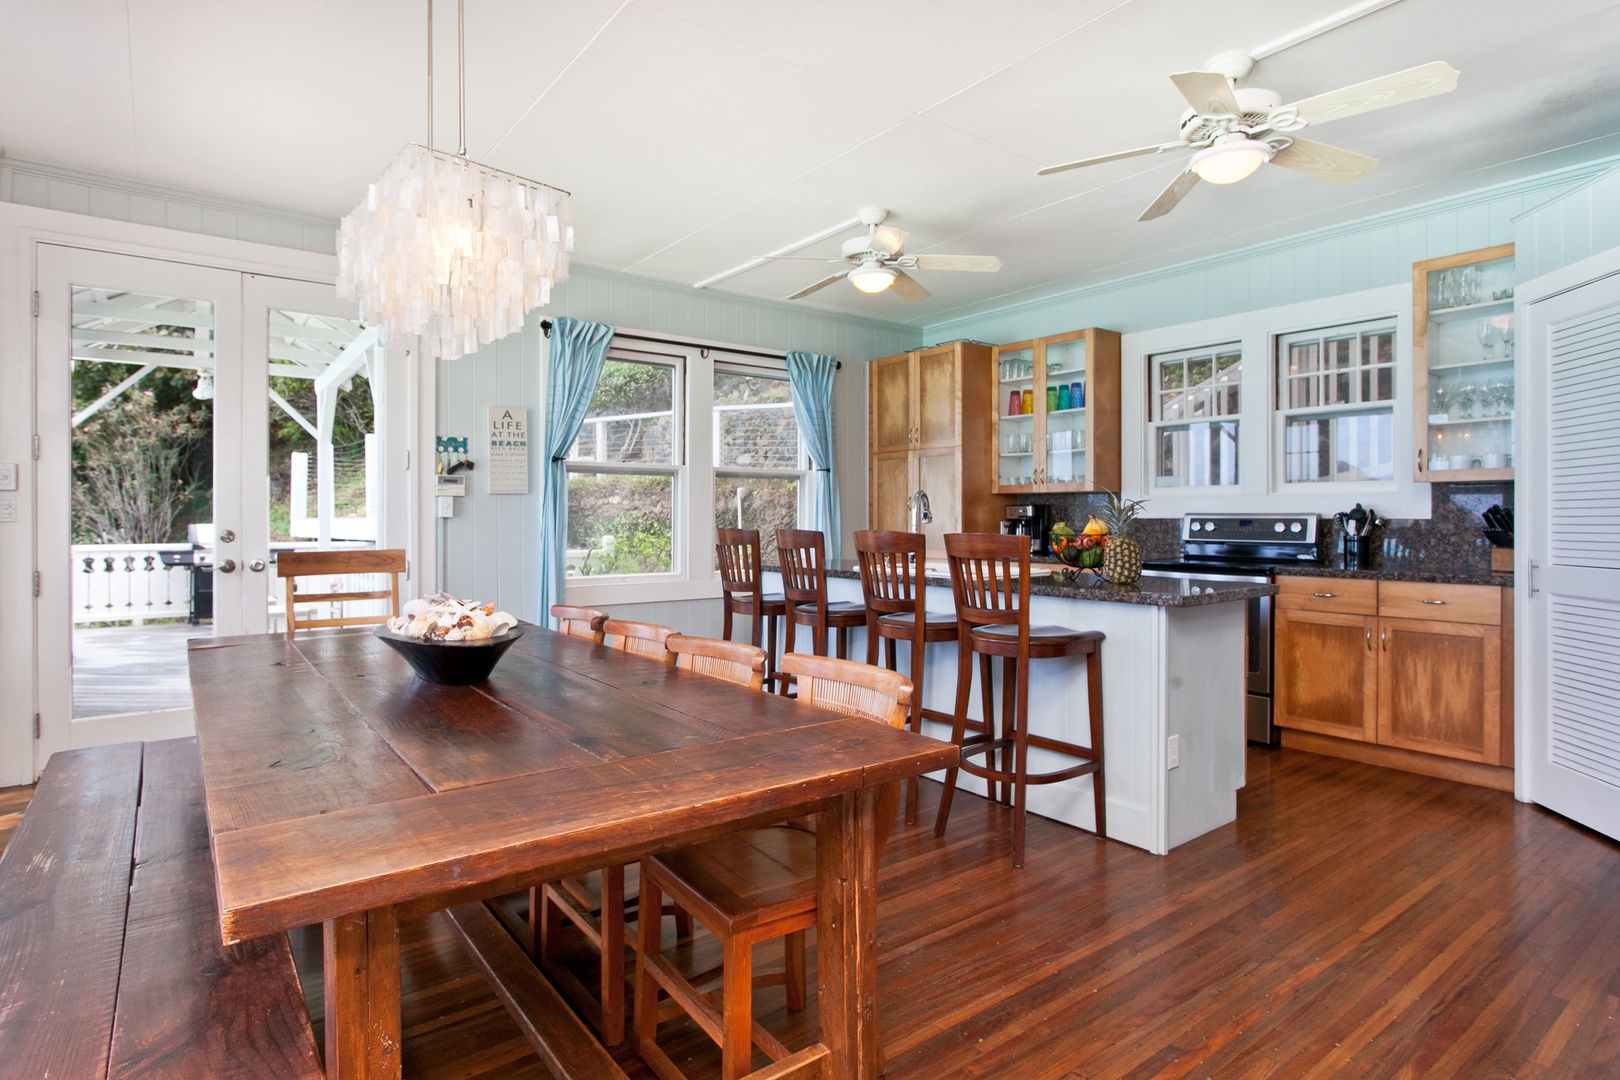 Kailua Vacation Rentals, Hale Mahina Lanikai* - Dining area conveniently located right off the kitchen.